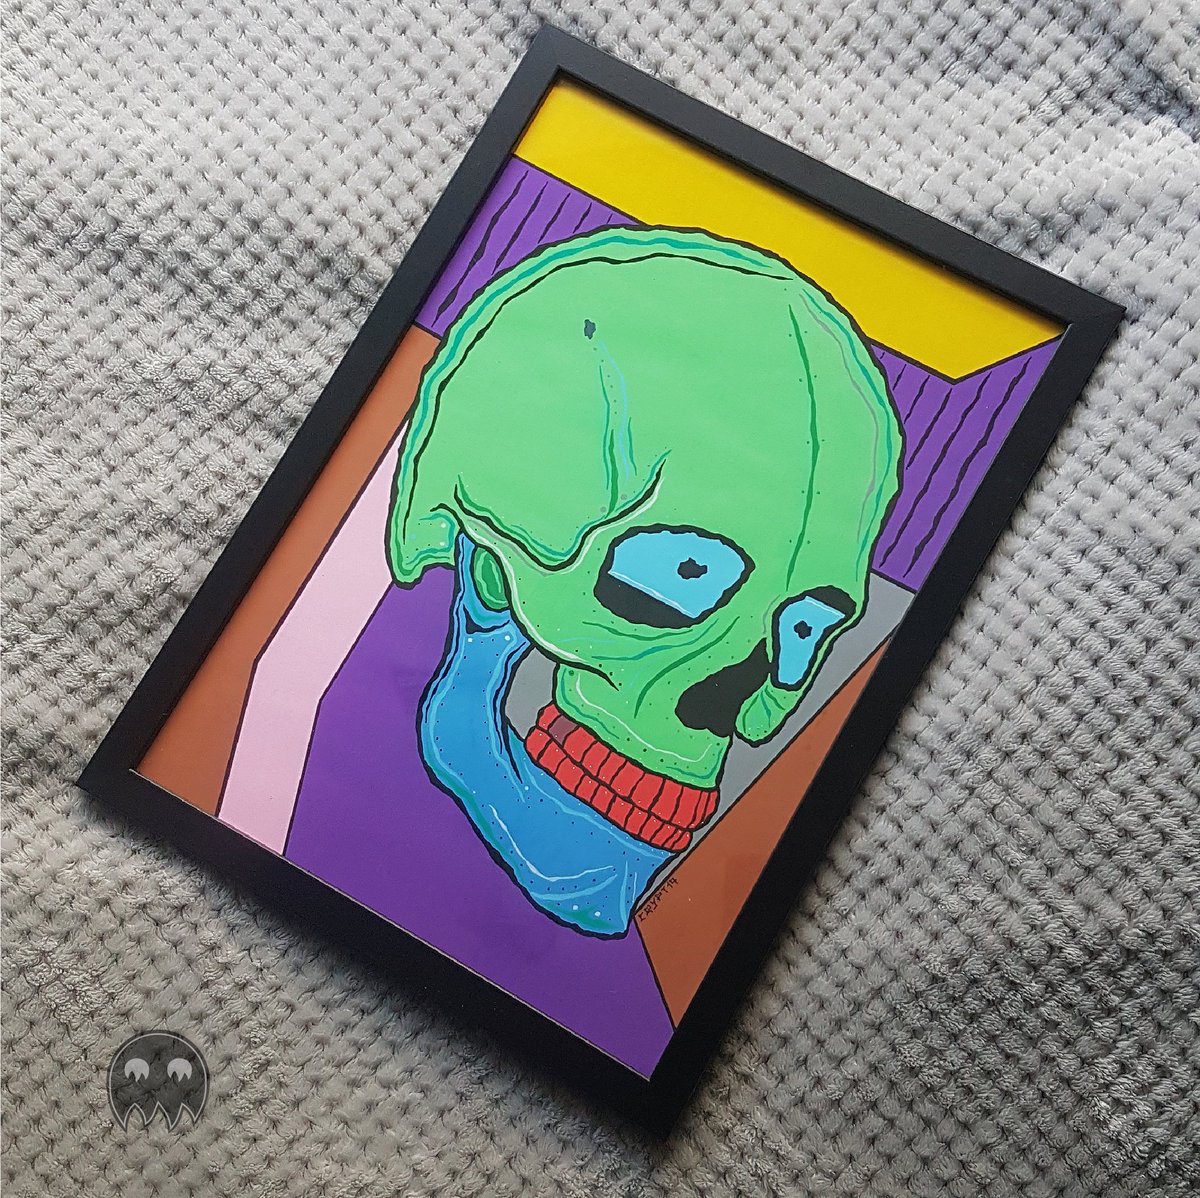 revamp (a3)a revisit to an old painting i made, adapted to my newer jaggy style https://robcryptx.bigcartel.com/product/revamp-jaggy-skull-painting-a3